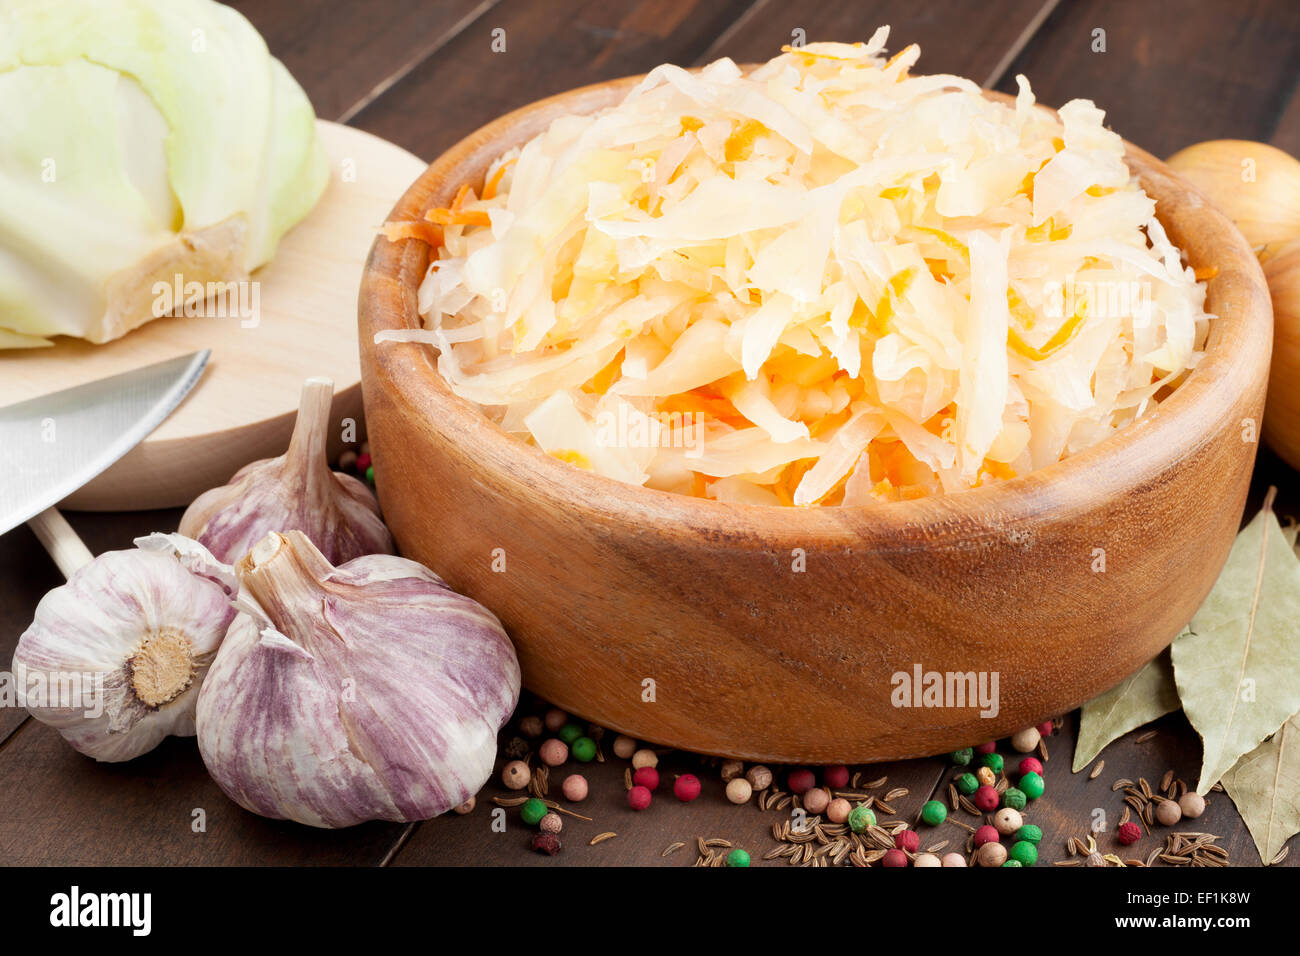 Sauerkraut with carrot in wooden bowl, garlic, spices, cabbage on a cutting board Stock Photo